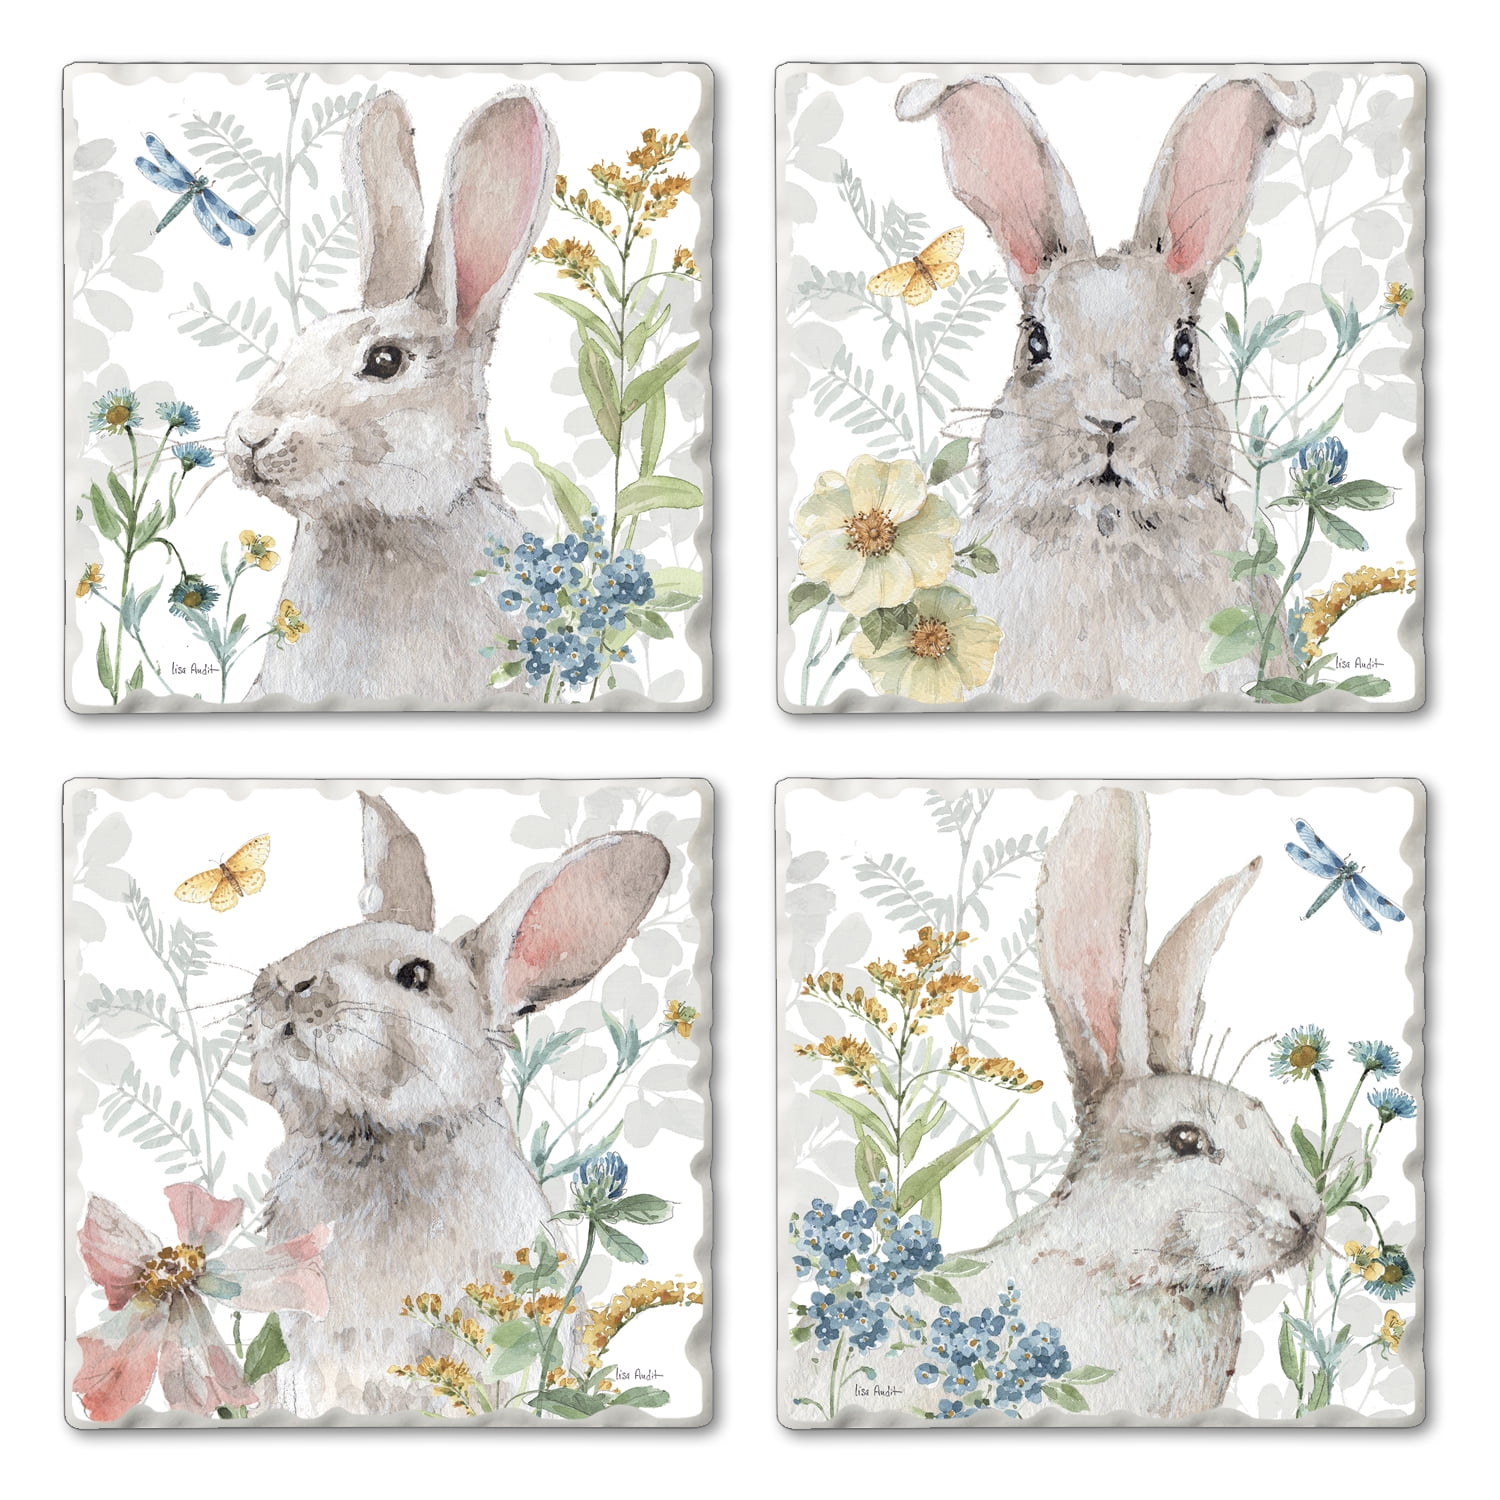 bunny rabbit at the cafe coffee shop art tile coaster gift 